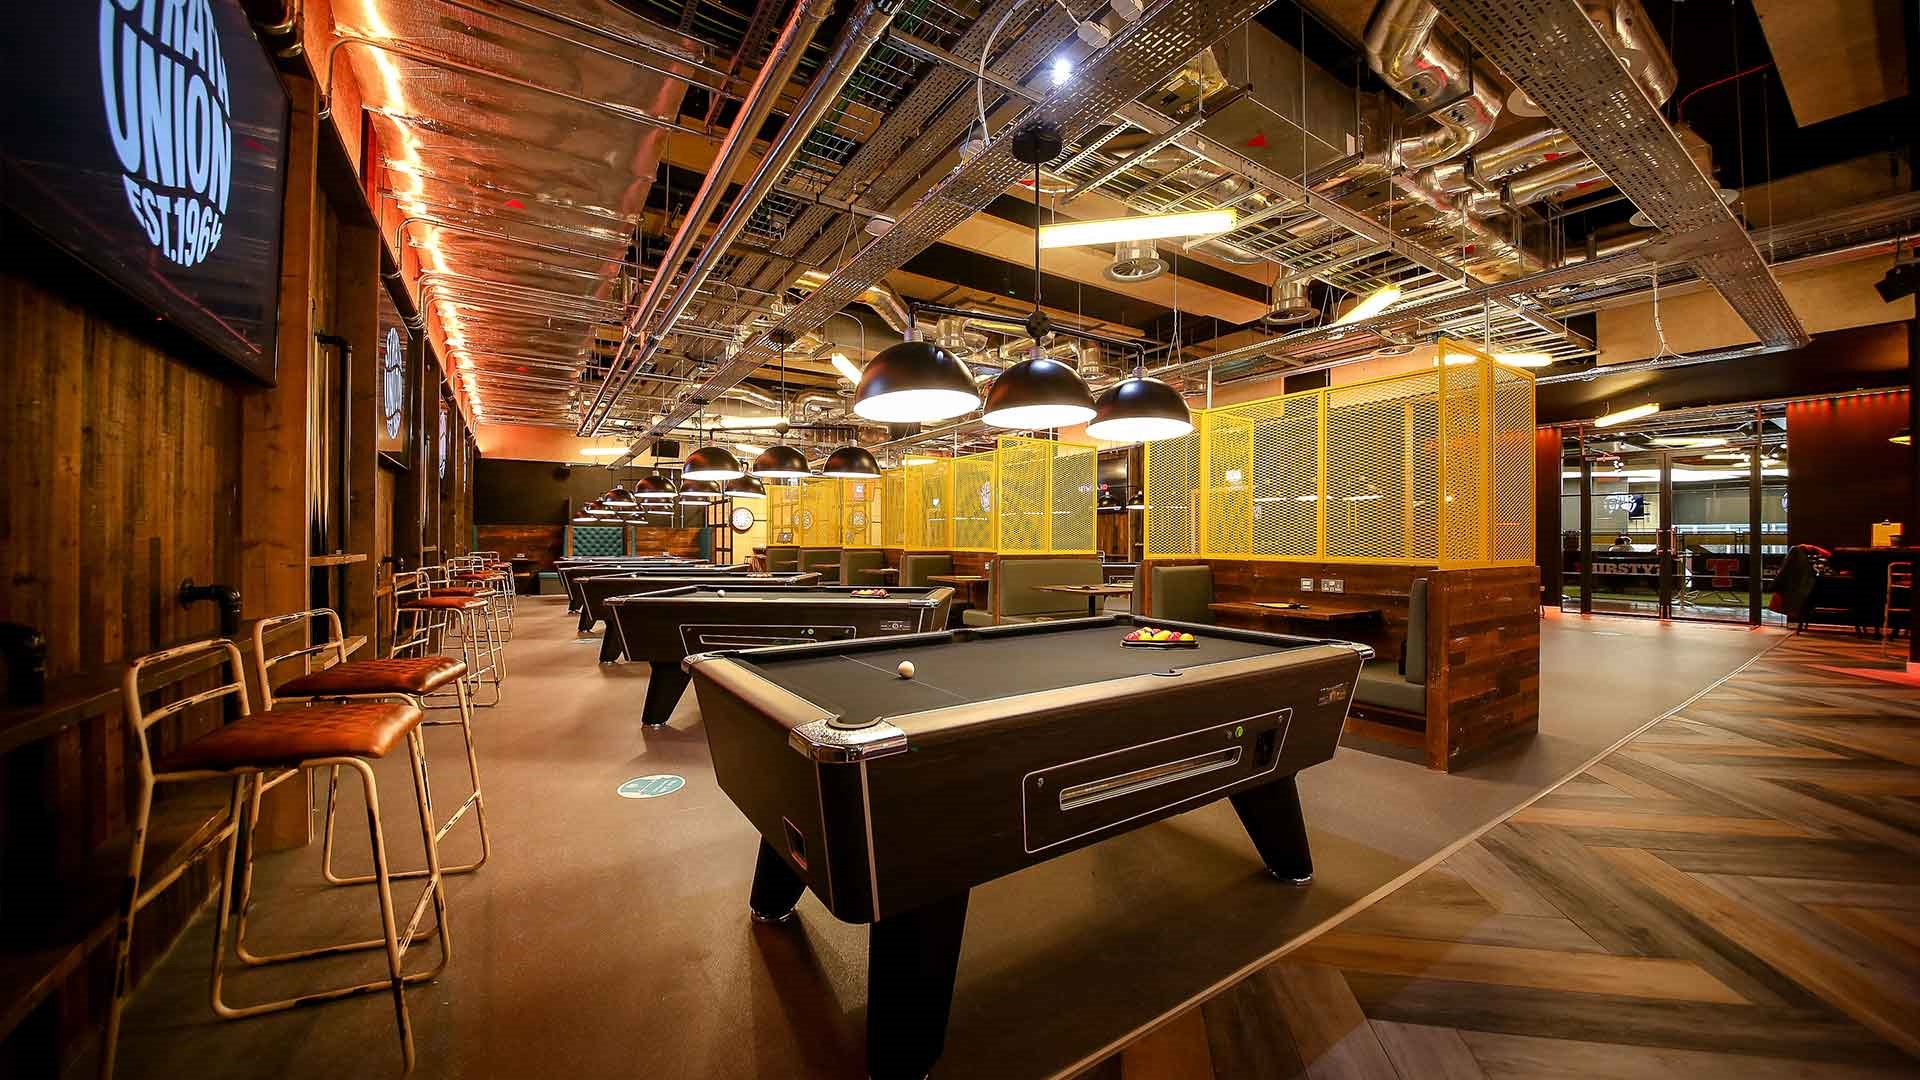 Pool tables and bar stools arranged in one of the Strath Union venues